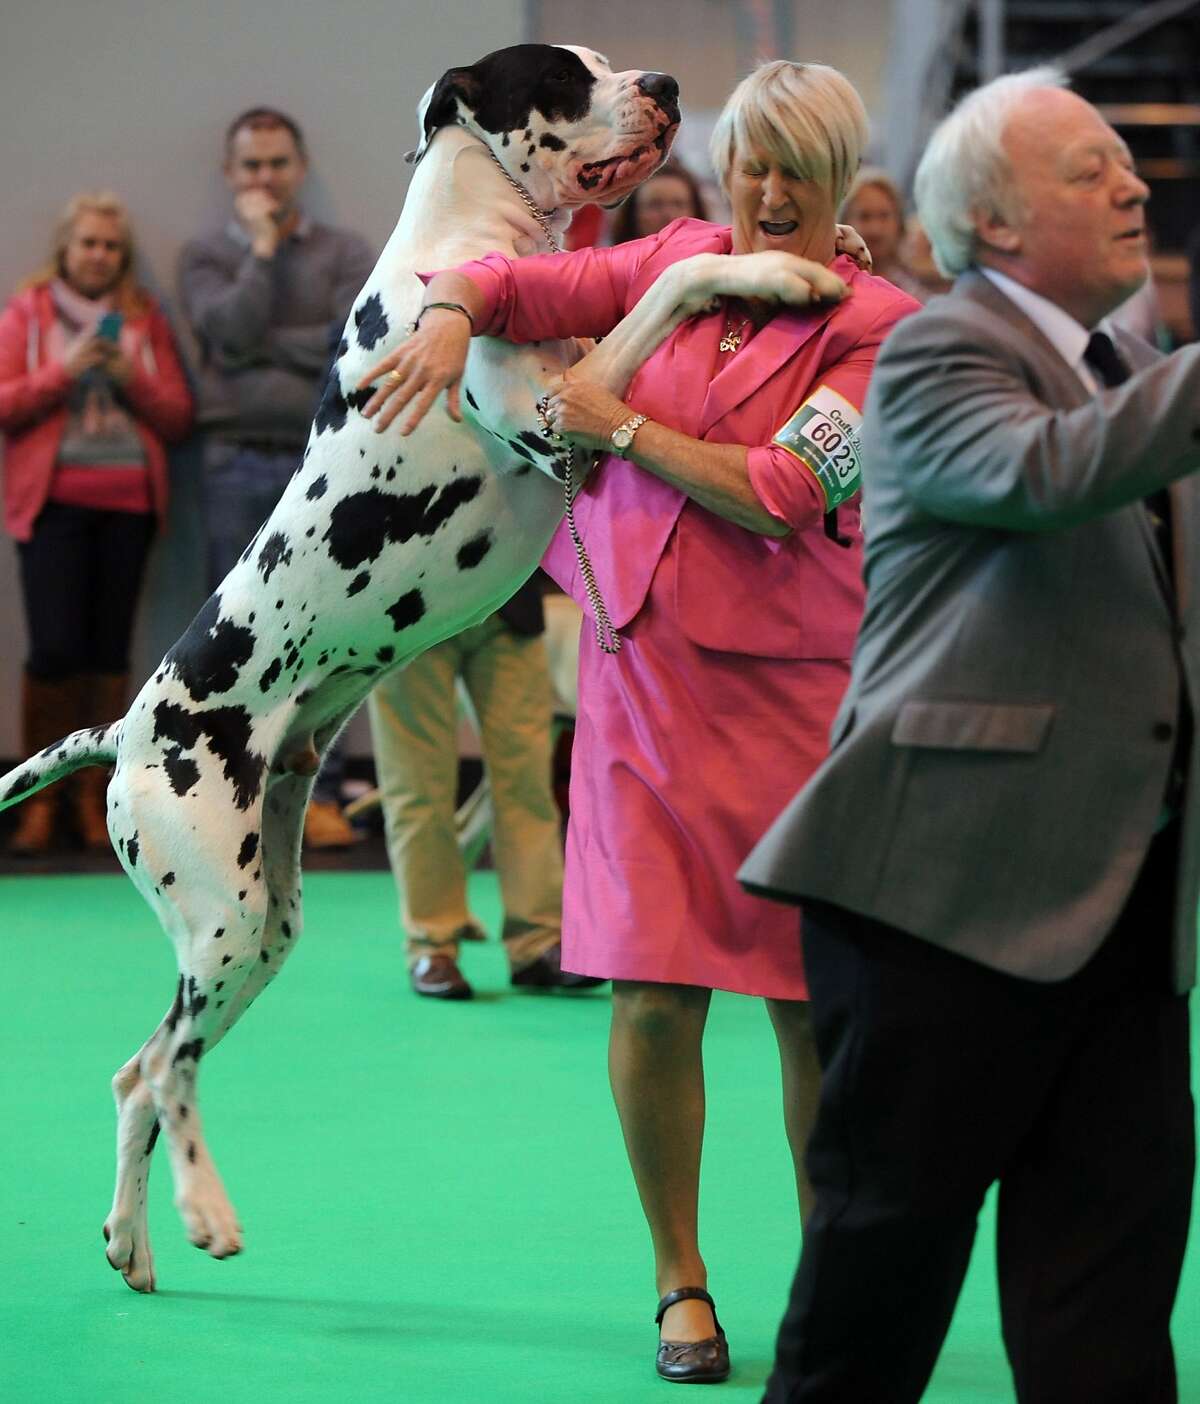 I WON! I WON! I WON! A Great Dane gets a little excited after taking first place in its class at the Crufts dog show in Birmingham, England.